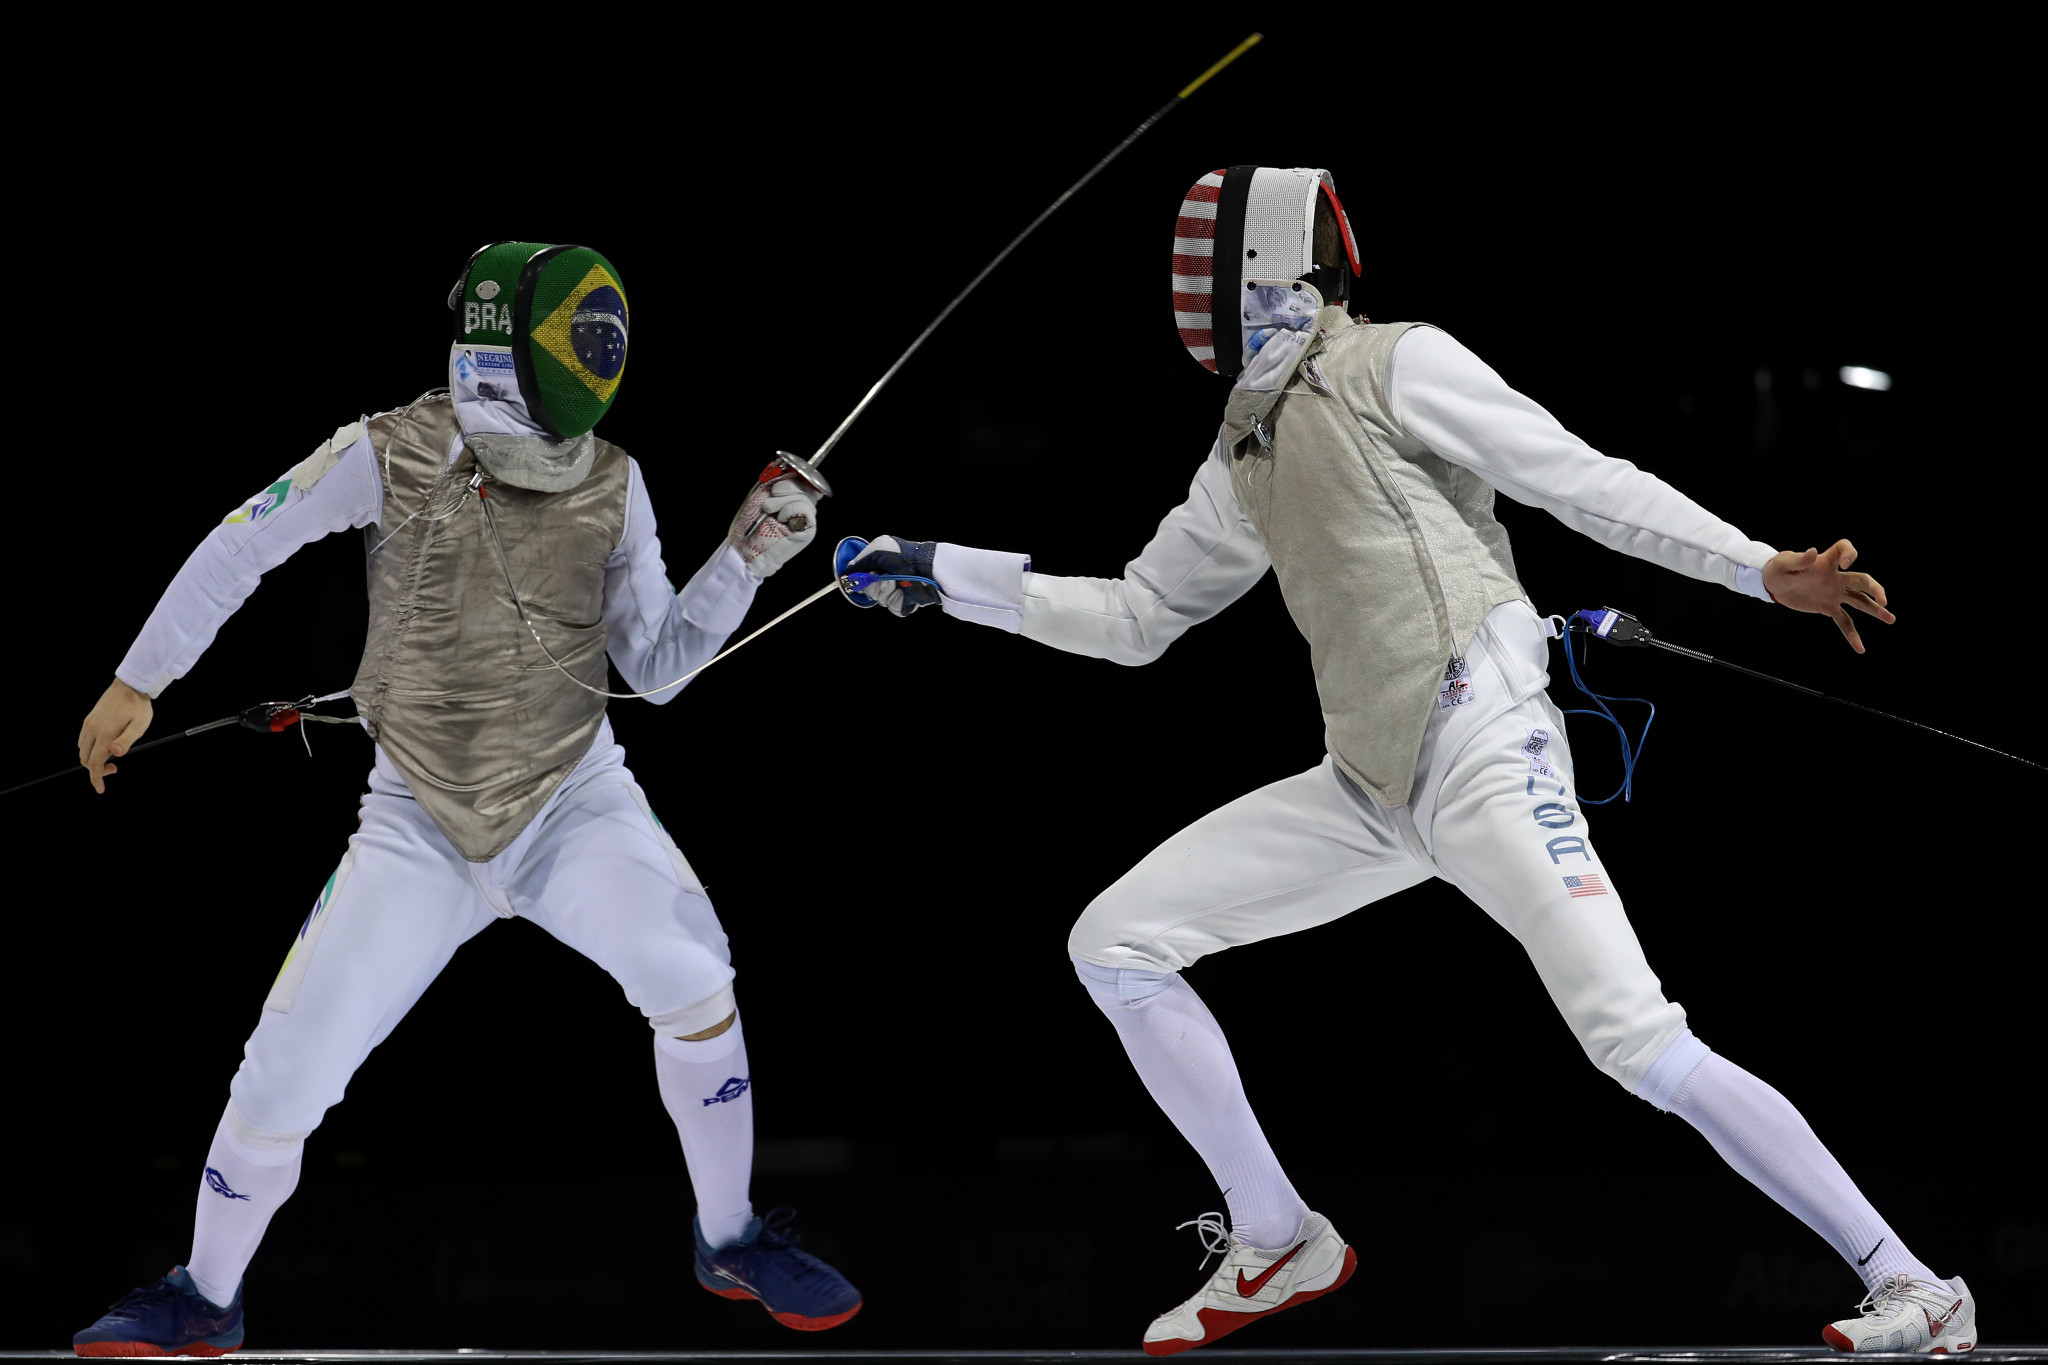 FIE pay tribute to Brazilian national fencing coach following death